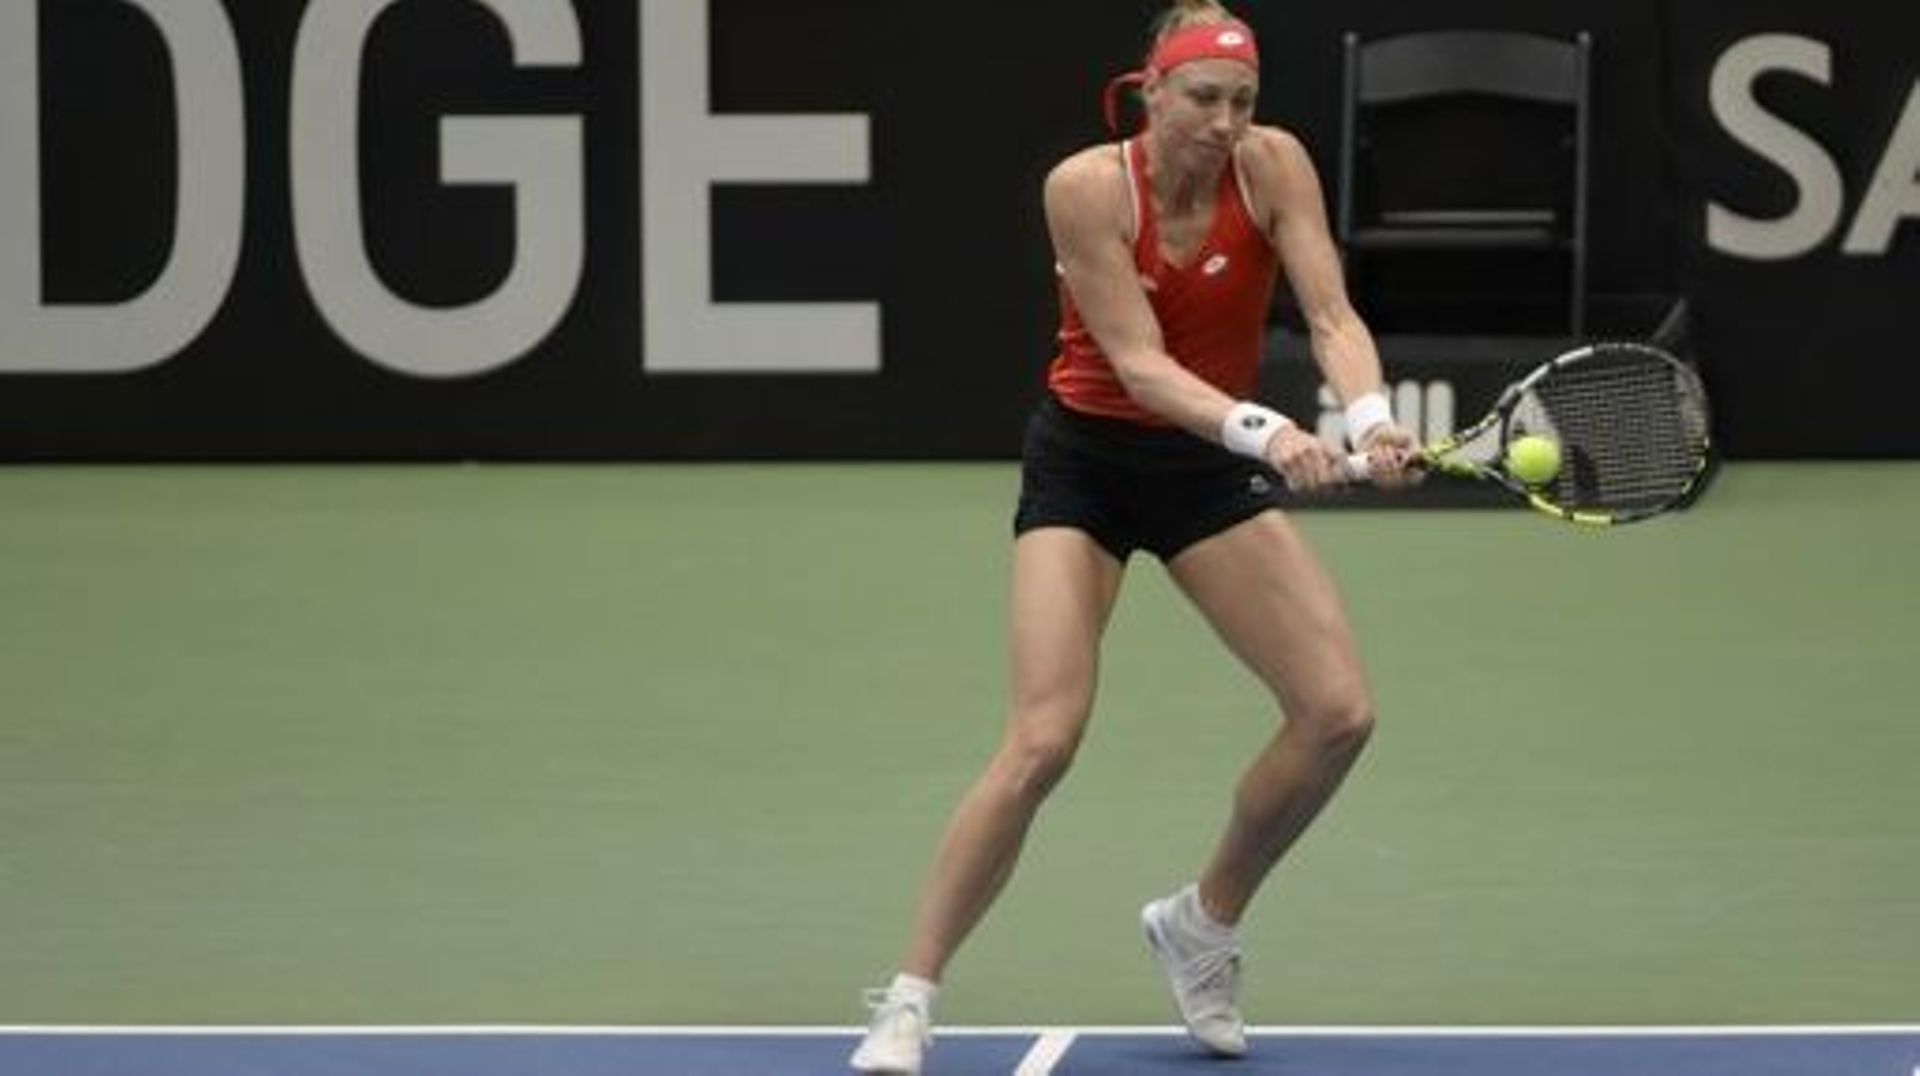 Belgian Yanina Wickmayer pictured in action during a tennis match against Canadian Fernandez during the meeting between Canada and Belgium, in the qualifiers for the Billie Jean King Cup tennis in Vancouver, Canada, on Friday 14 April 2023. BELGA PHOTO AN